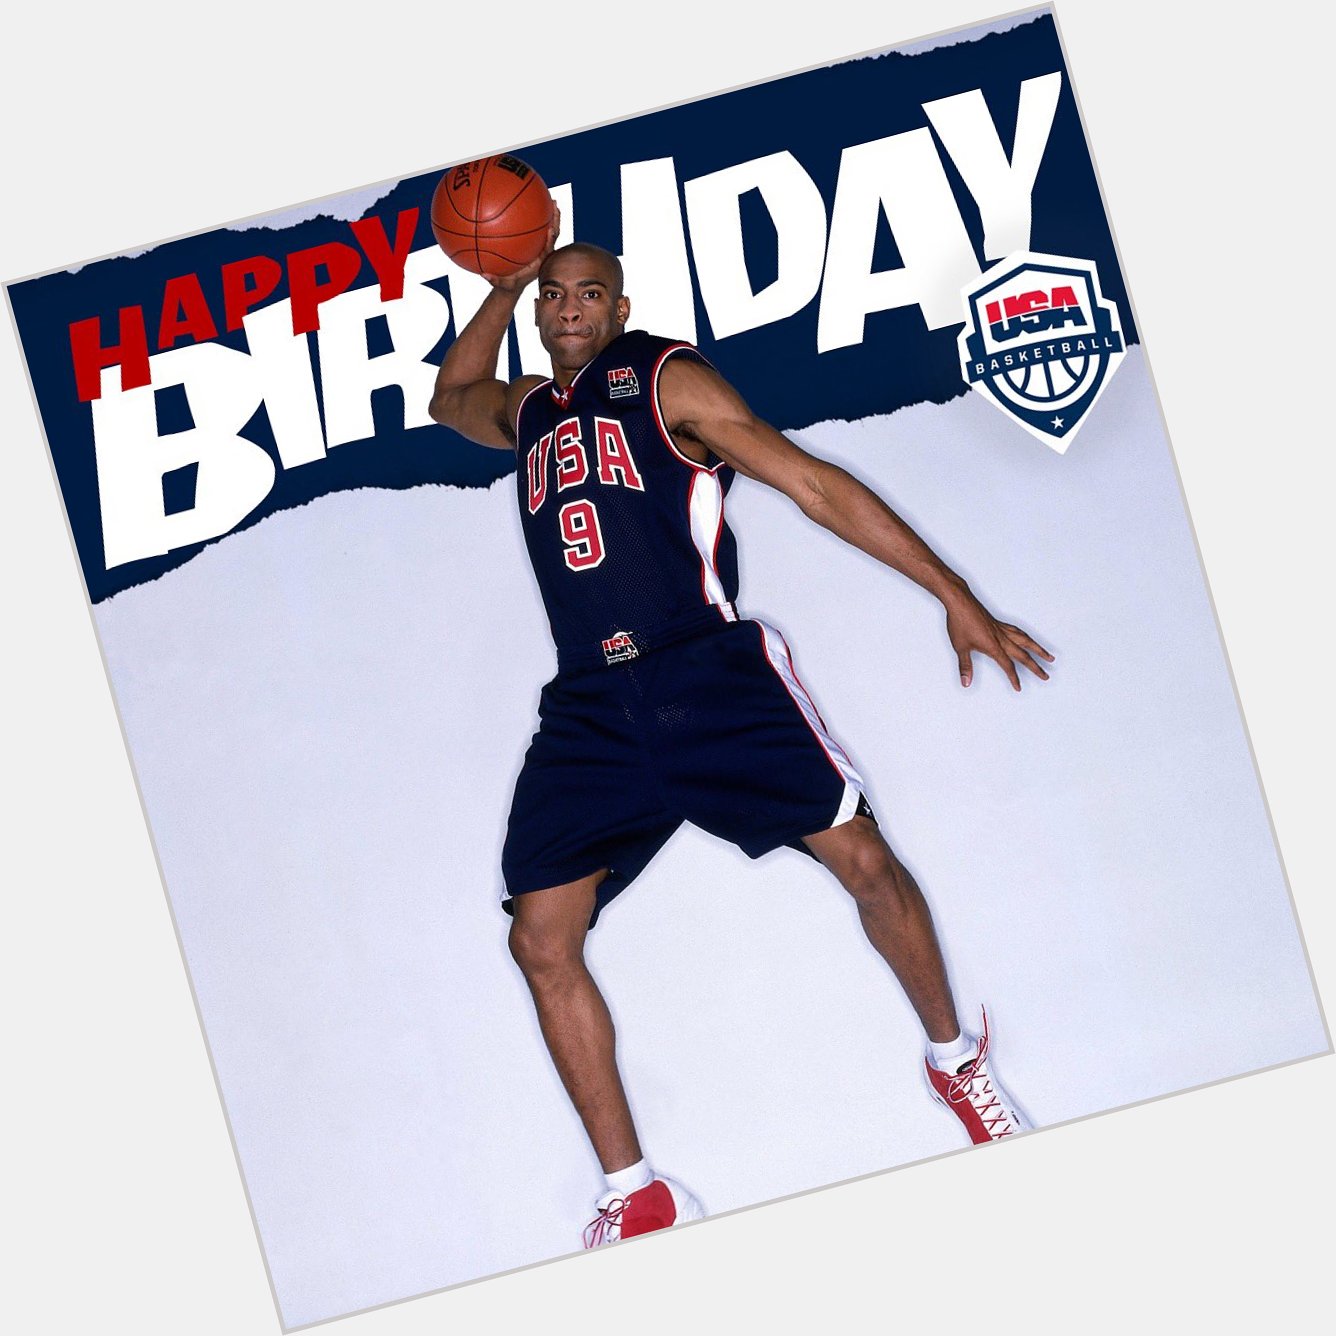 A true aerial artist.

to wish Vince Carter a happy birthday!   